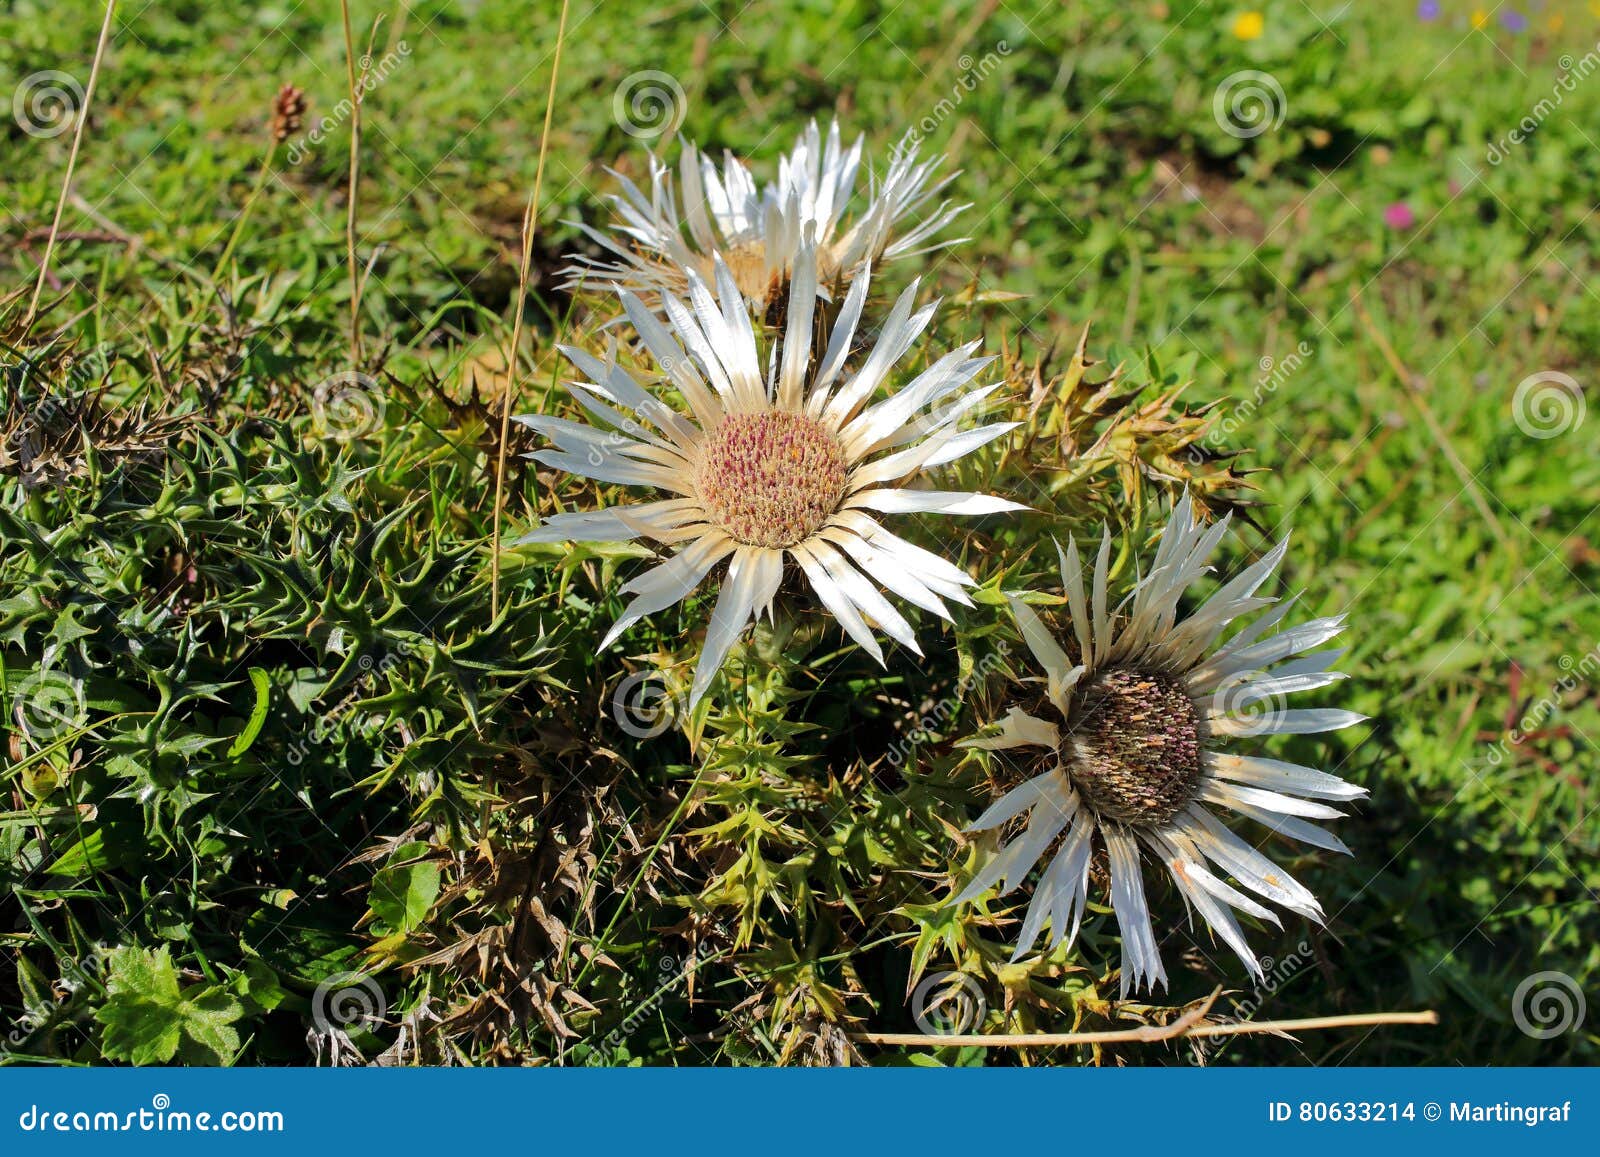 silver thistles in full bloom, alpine flora in allgau alps of germany